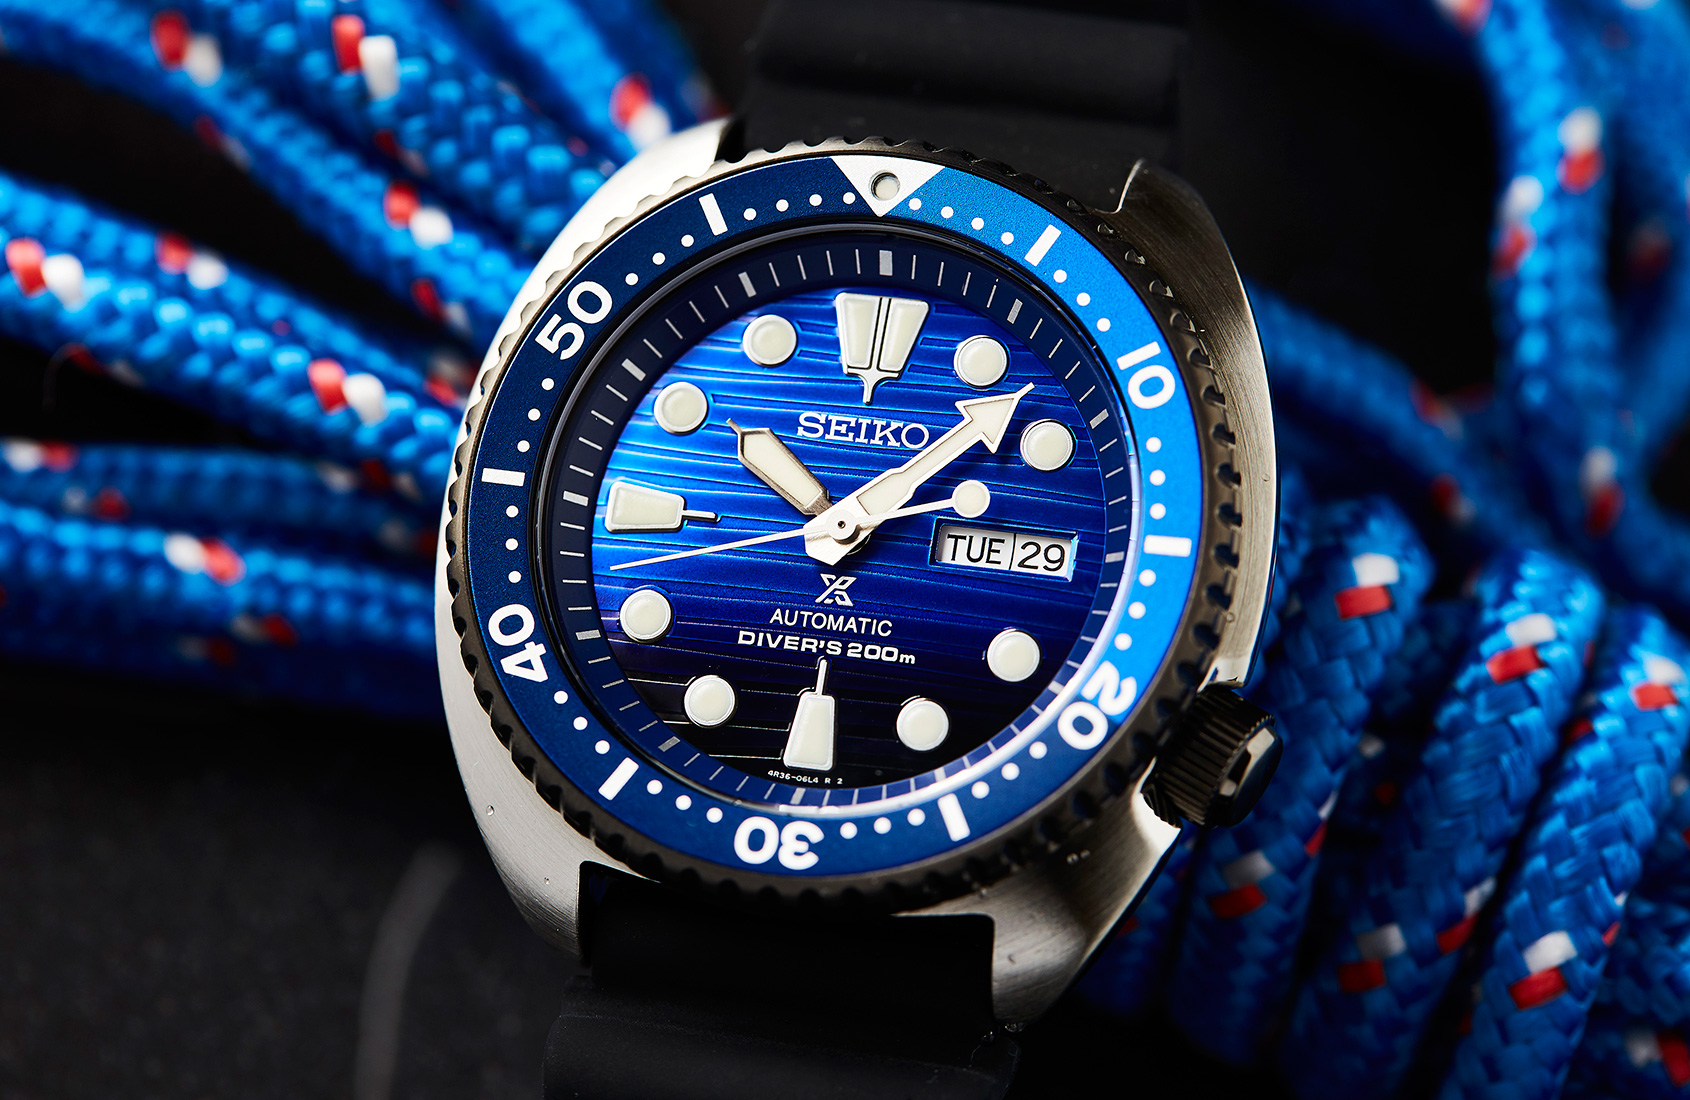 VIDEO This Seiko Turtle is set to Save The Ocean the